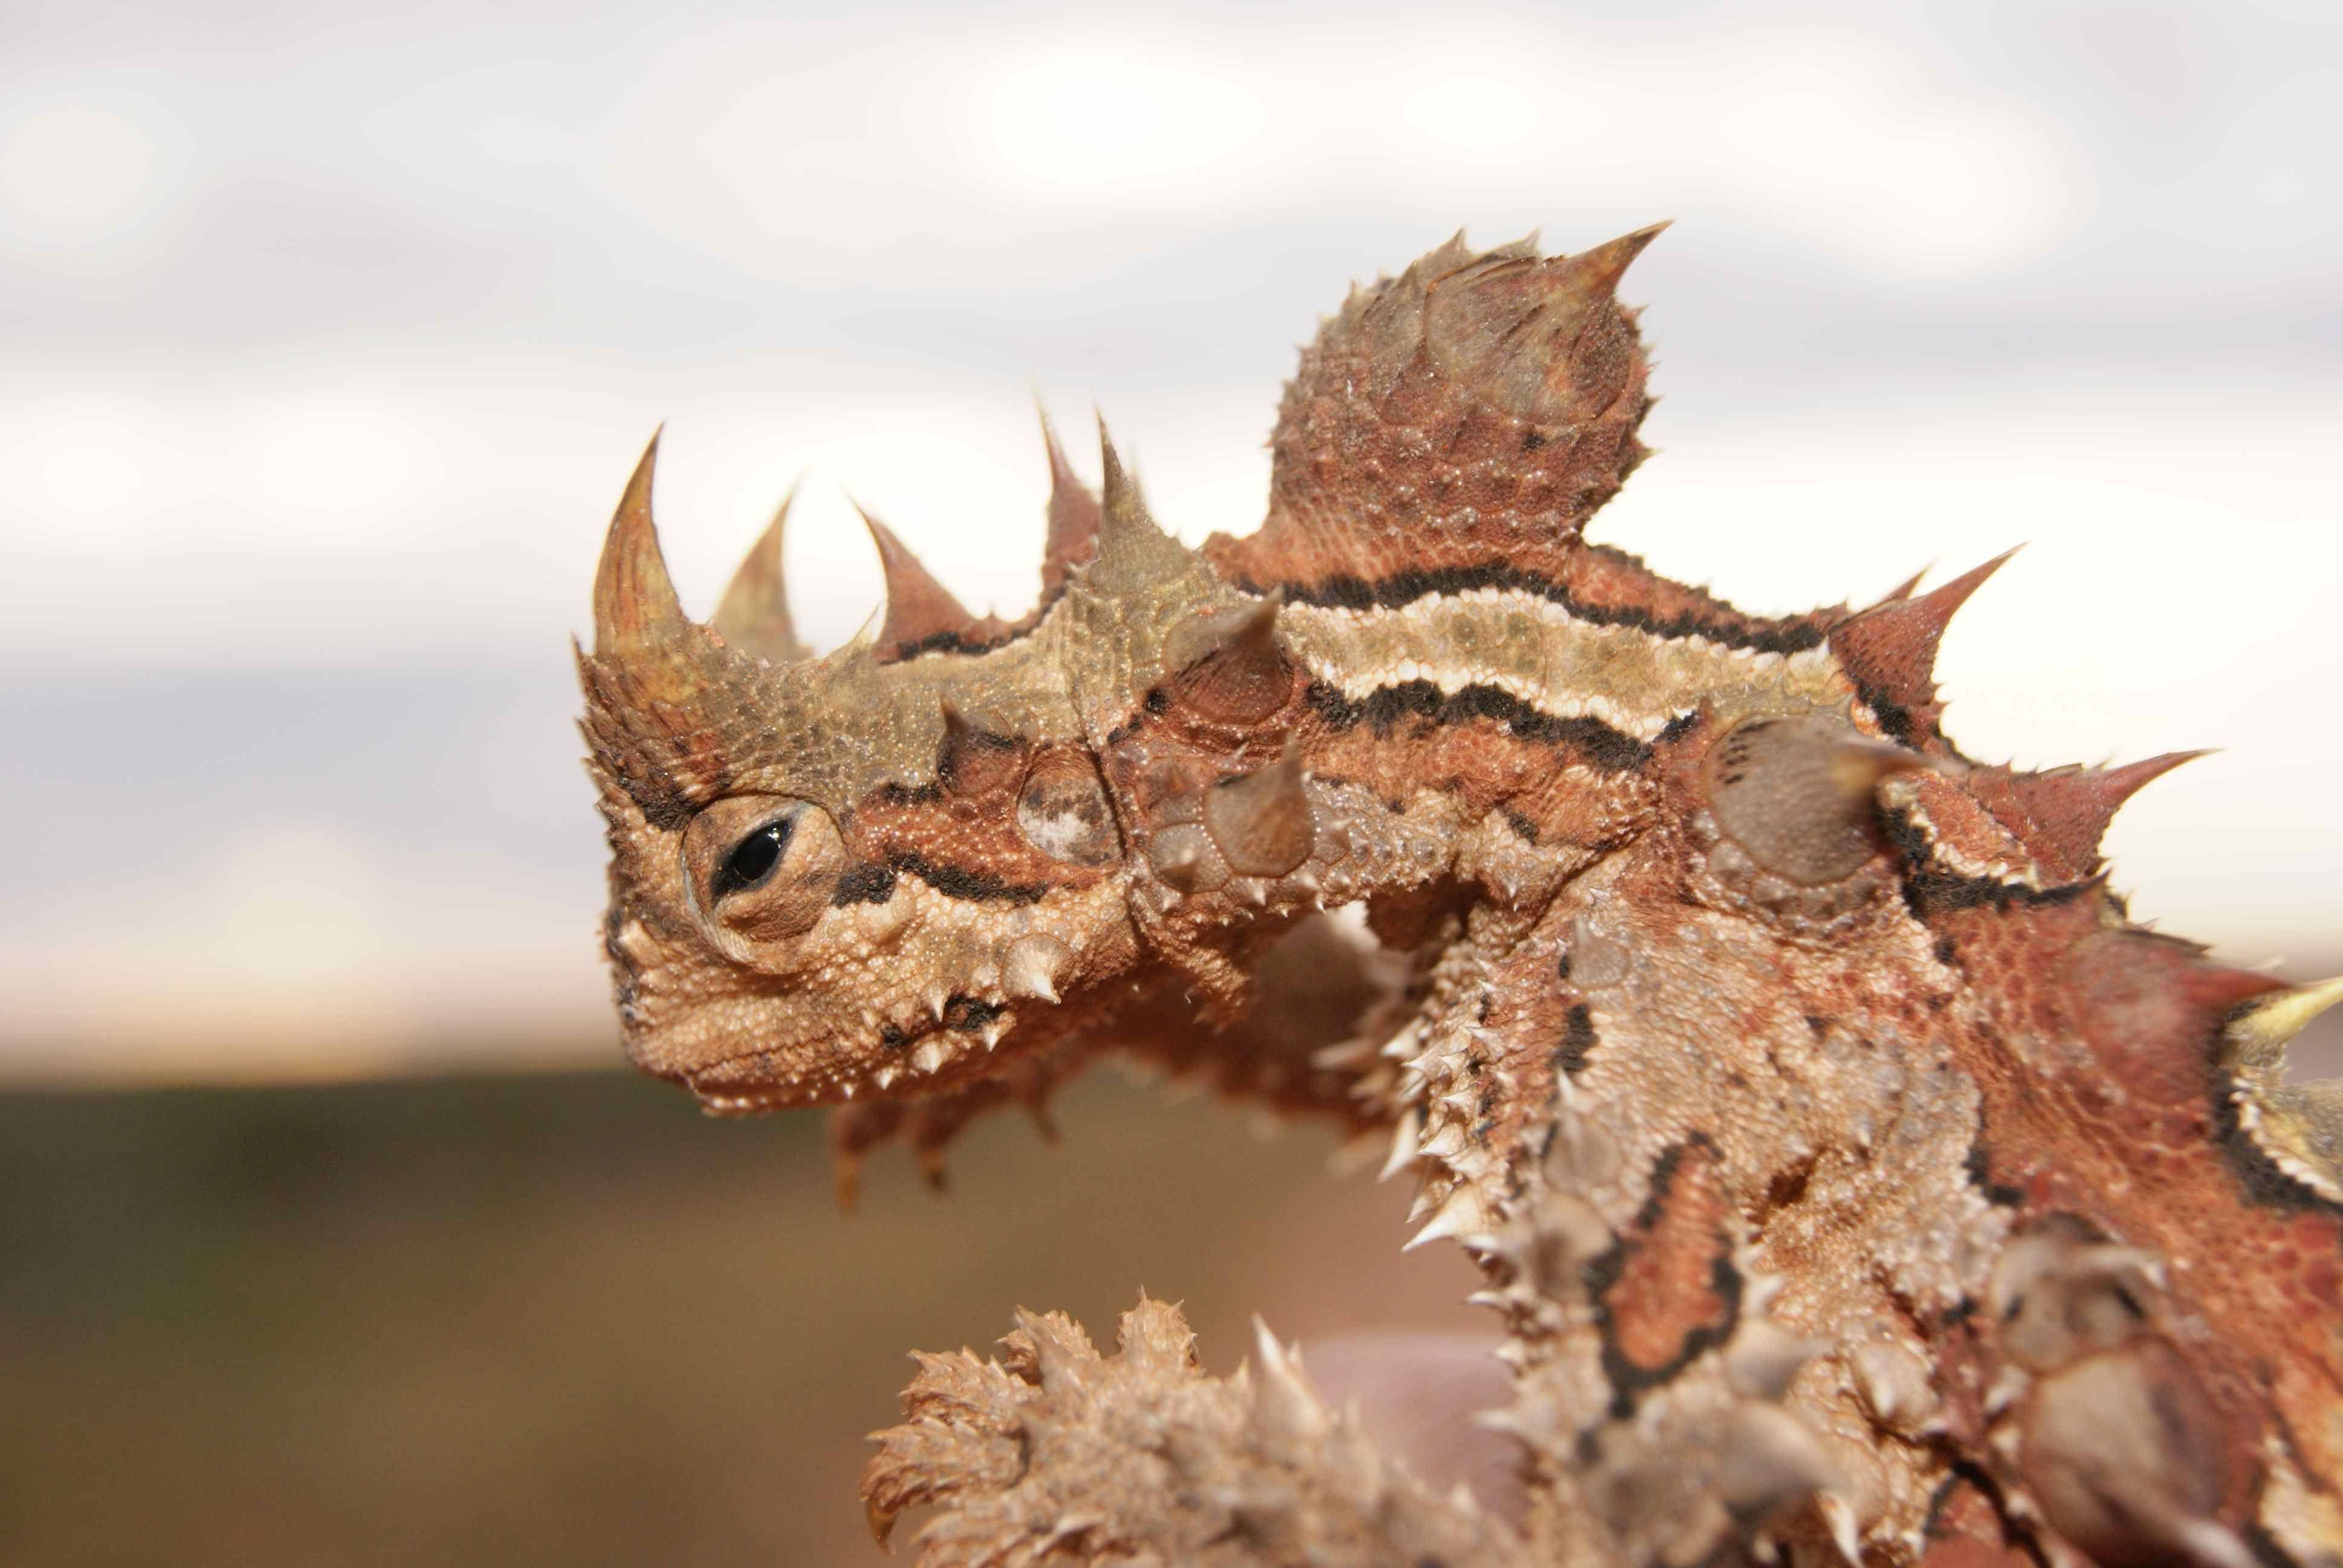 Thorny Devil Wallpaper Image Photo Picture Background